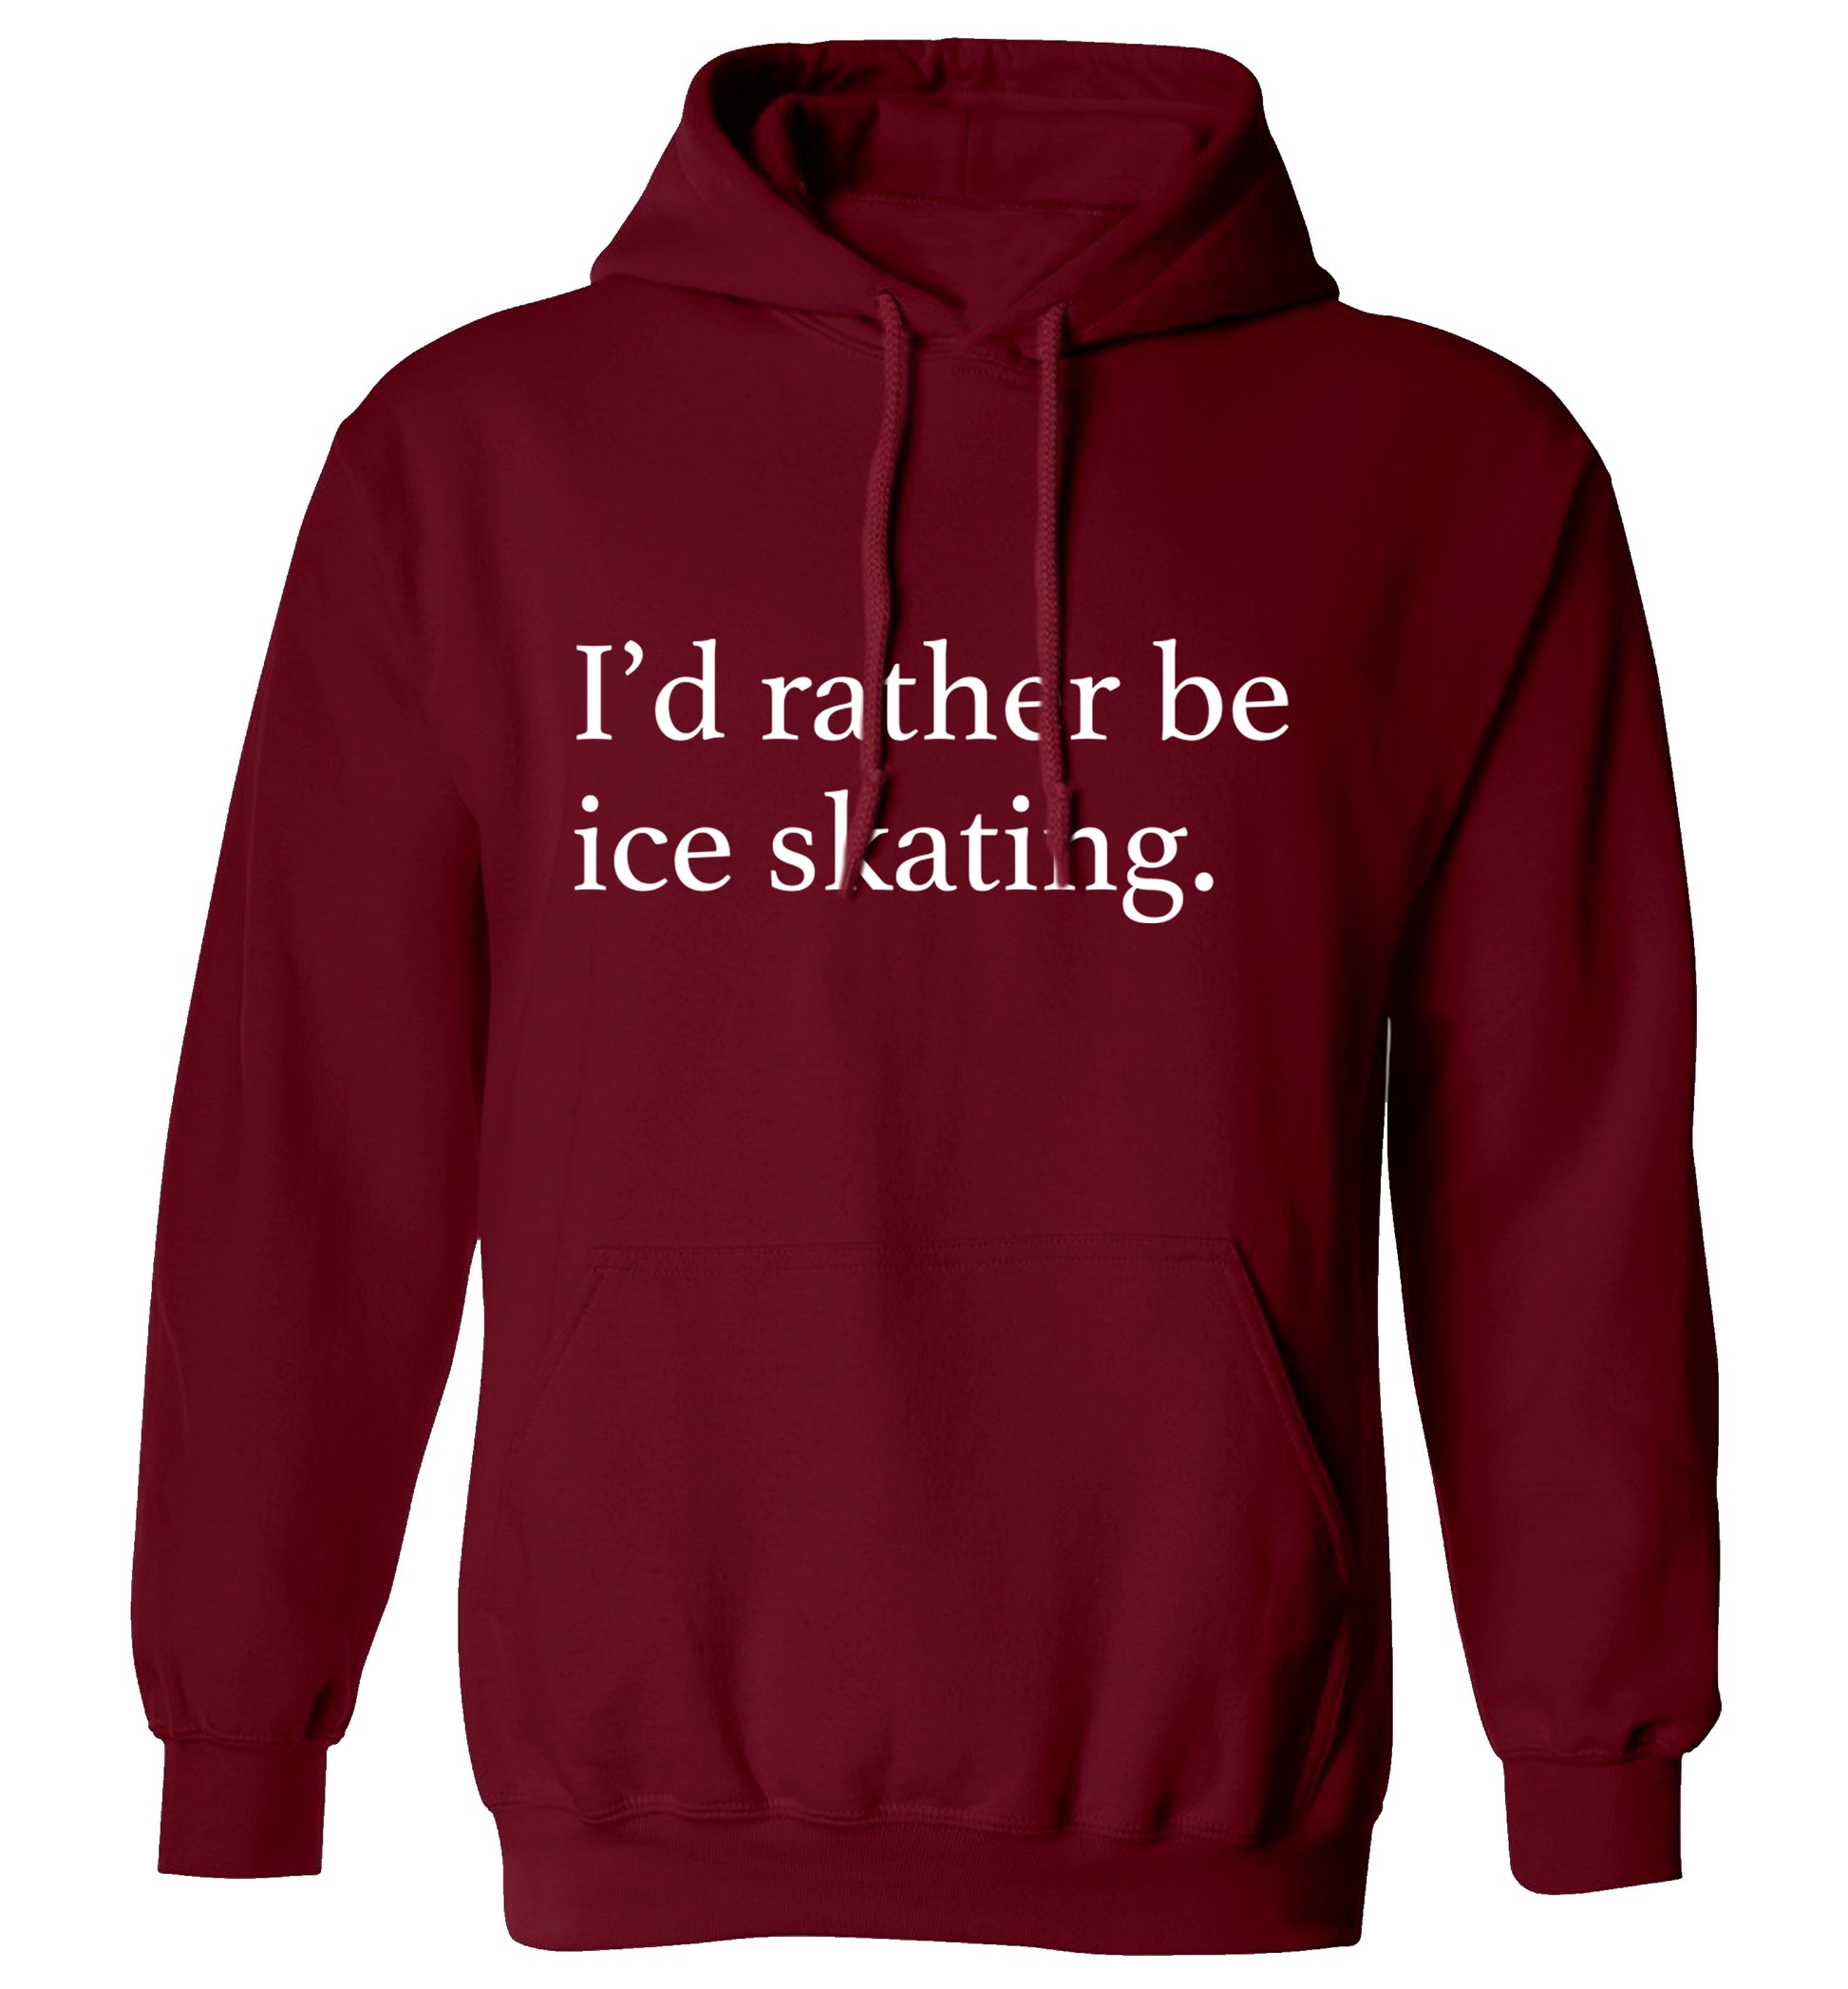 I'd rather be ice skating adults unisexmaroon hoodie 2XL